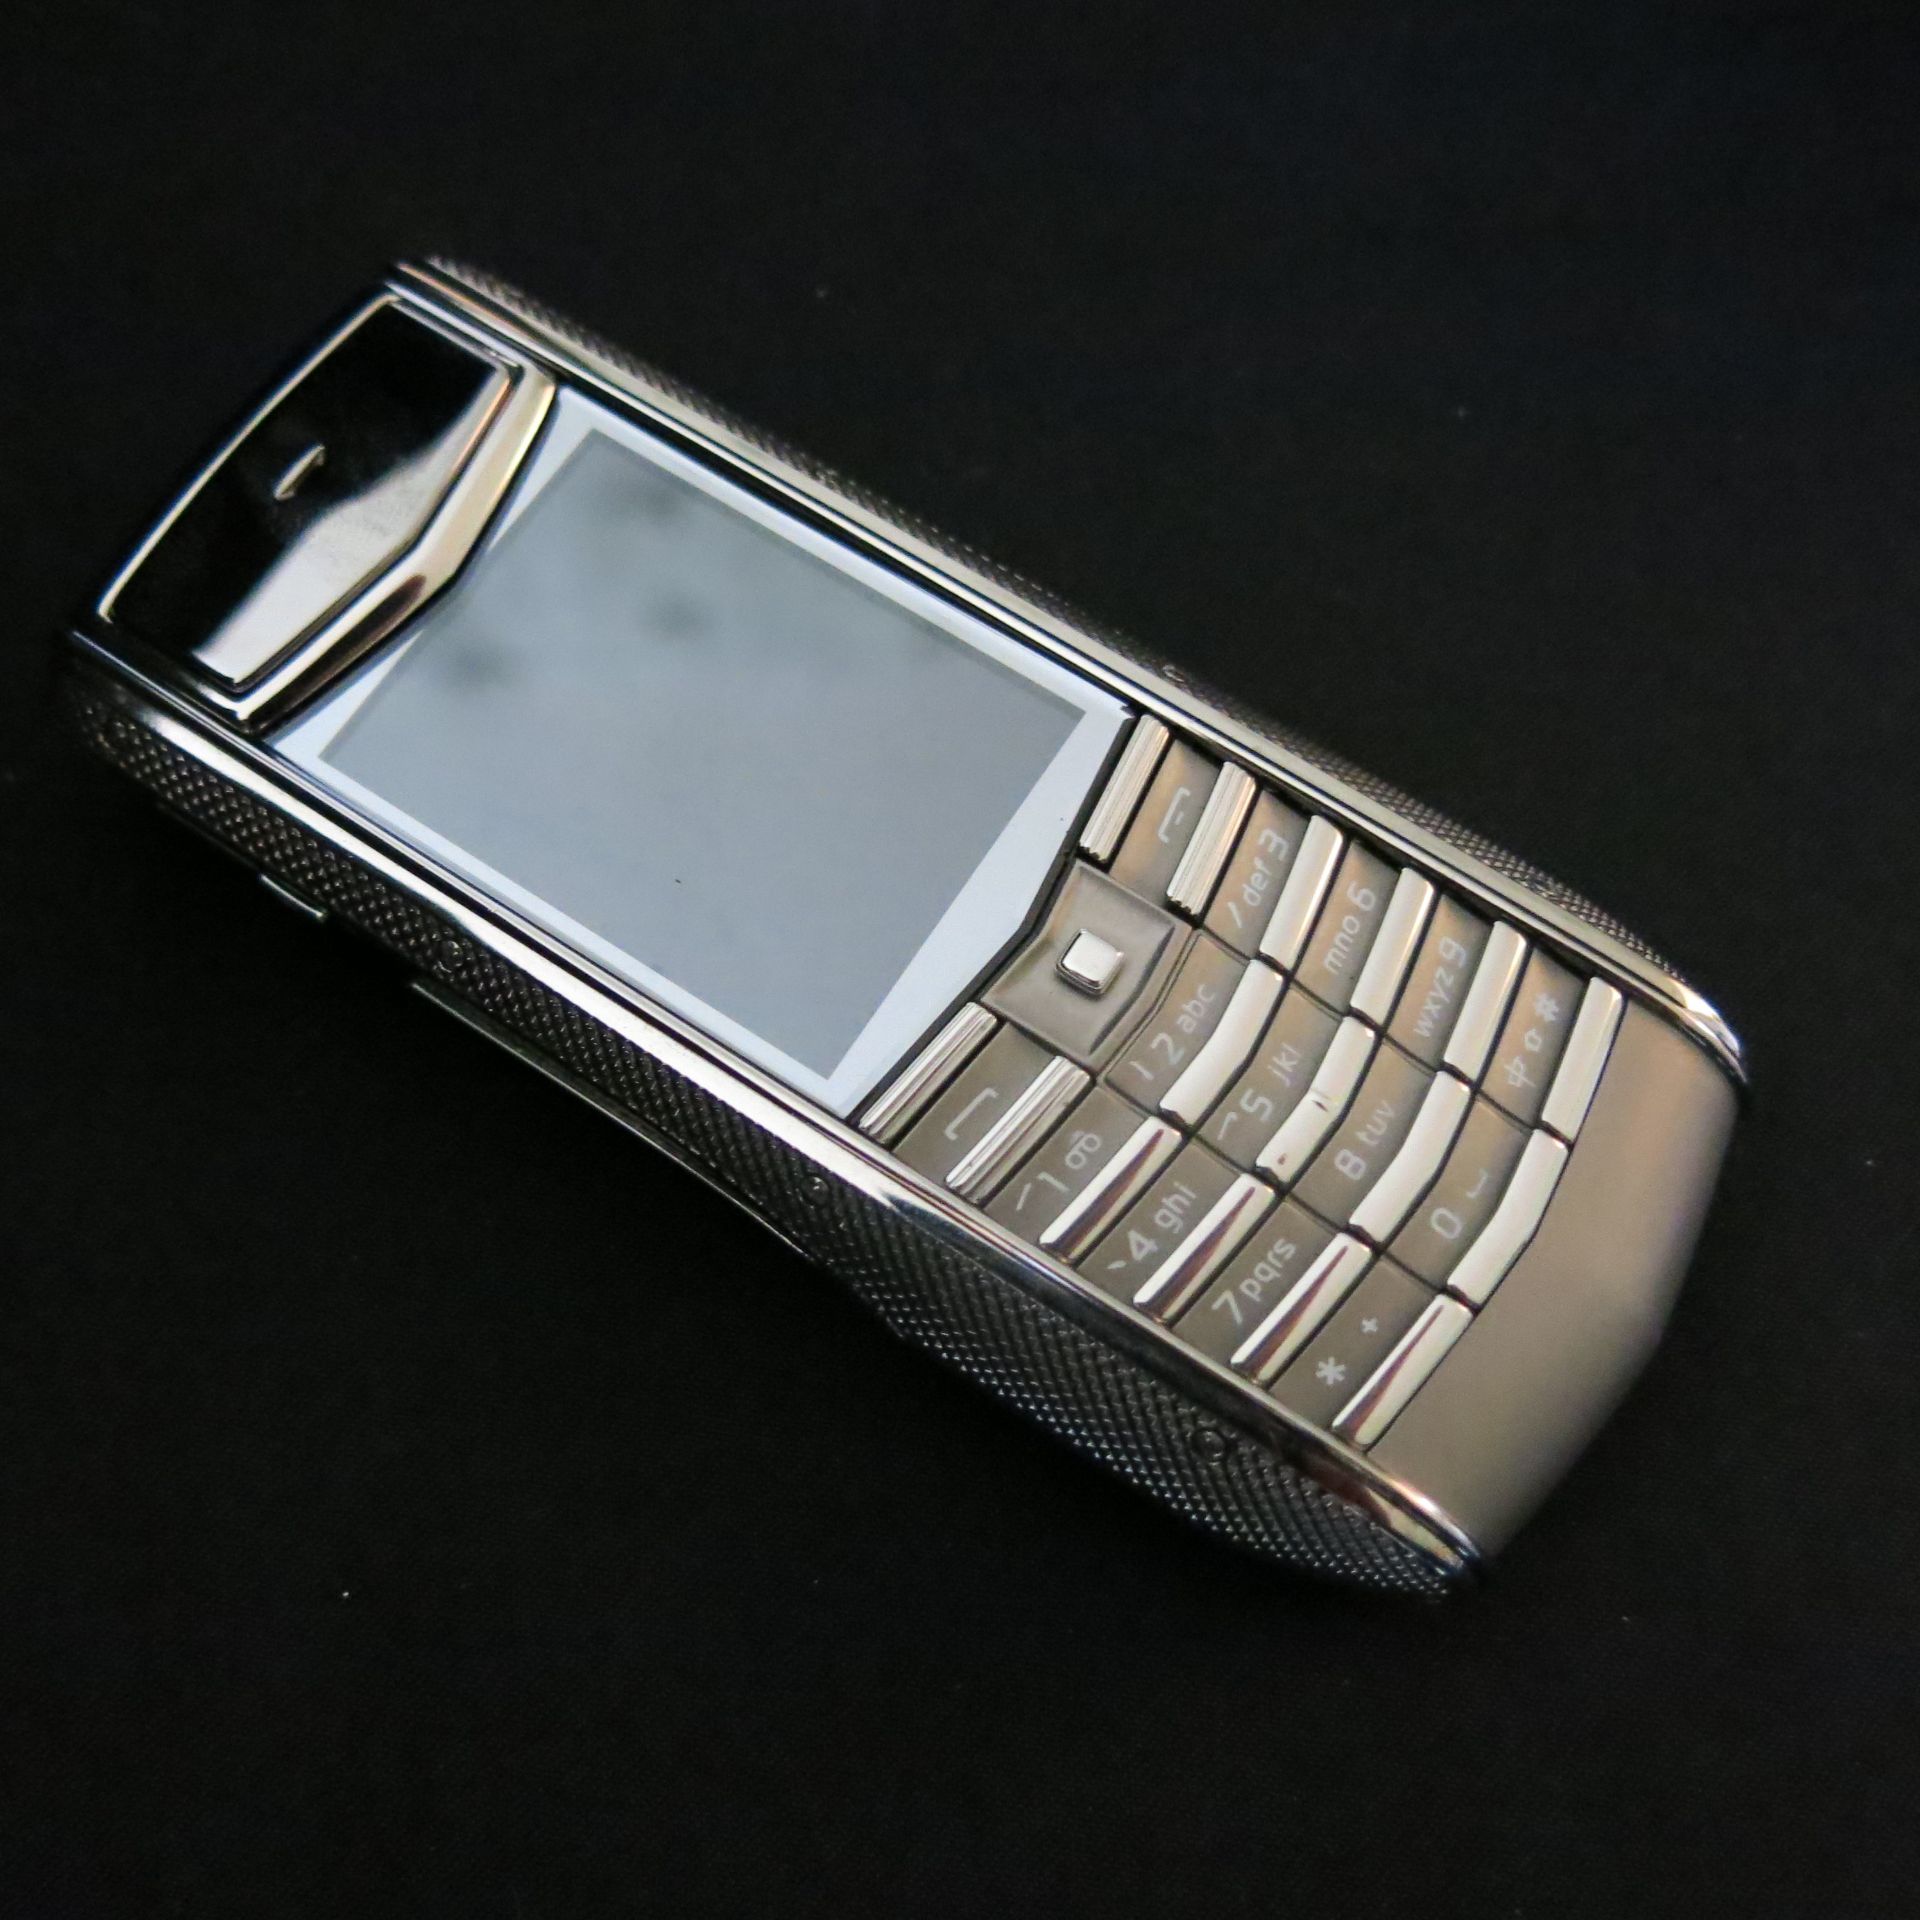 Entire Contents of the VERTU Museum Collection to Include: 105 Various Iconic Phones & Appearance - Image 52 of 106